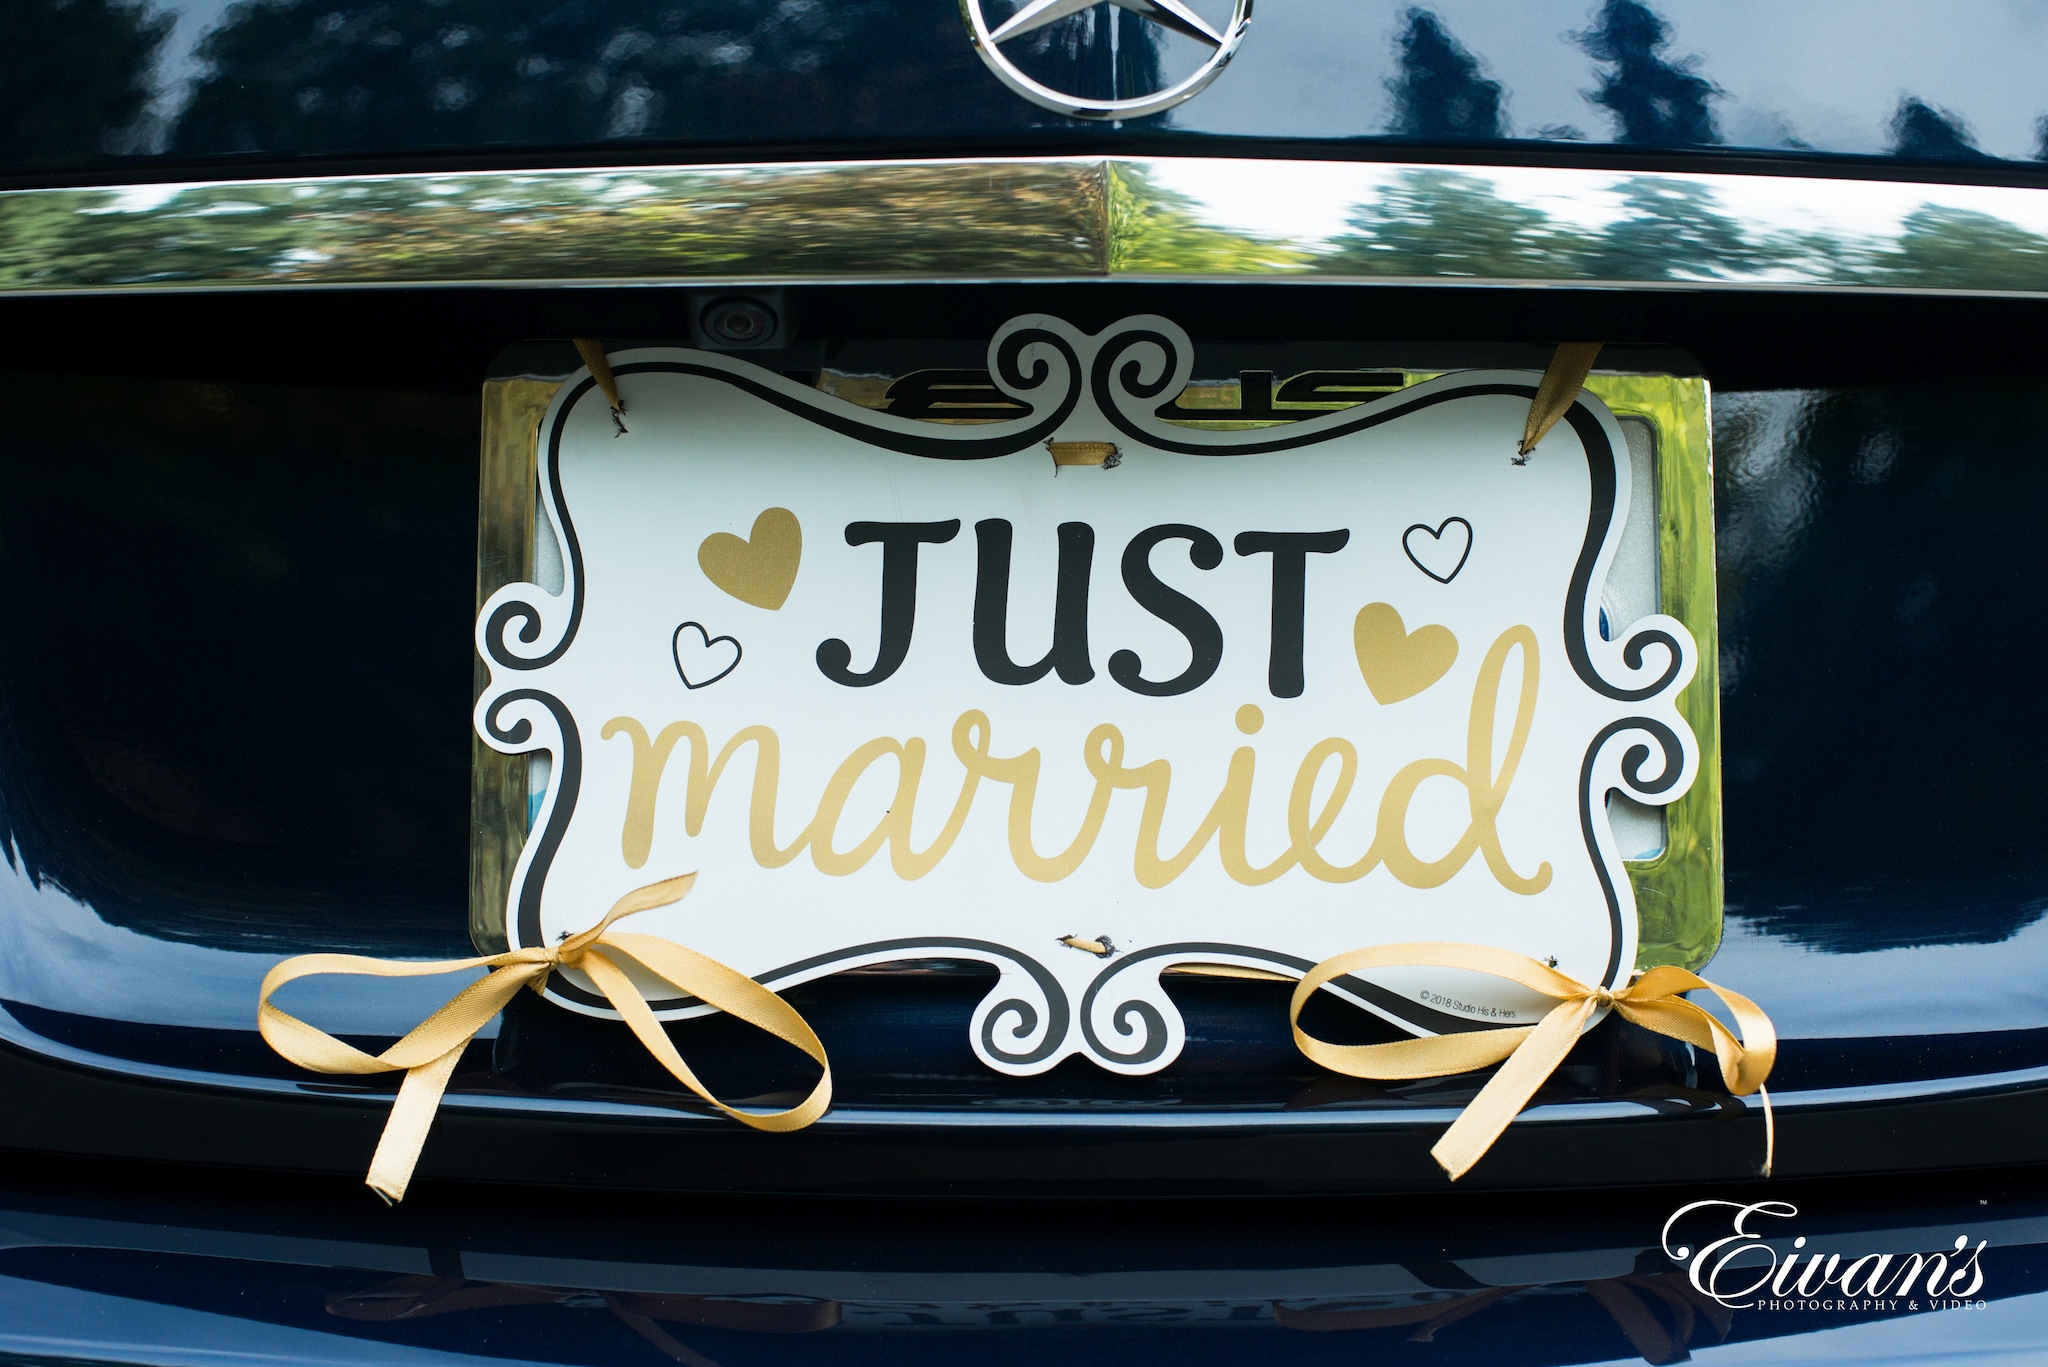 Home Decor Just Married Wedding Banner Set-Wedding Decorations, Bridal Shower and Engagement Photo Path, Car Decoration, Size: 19